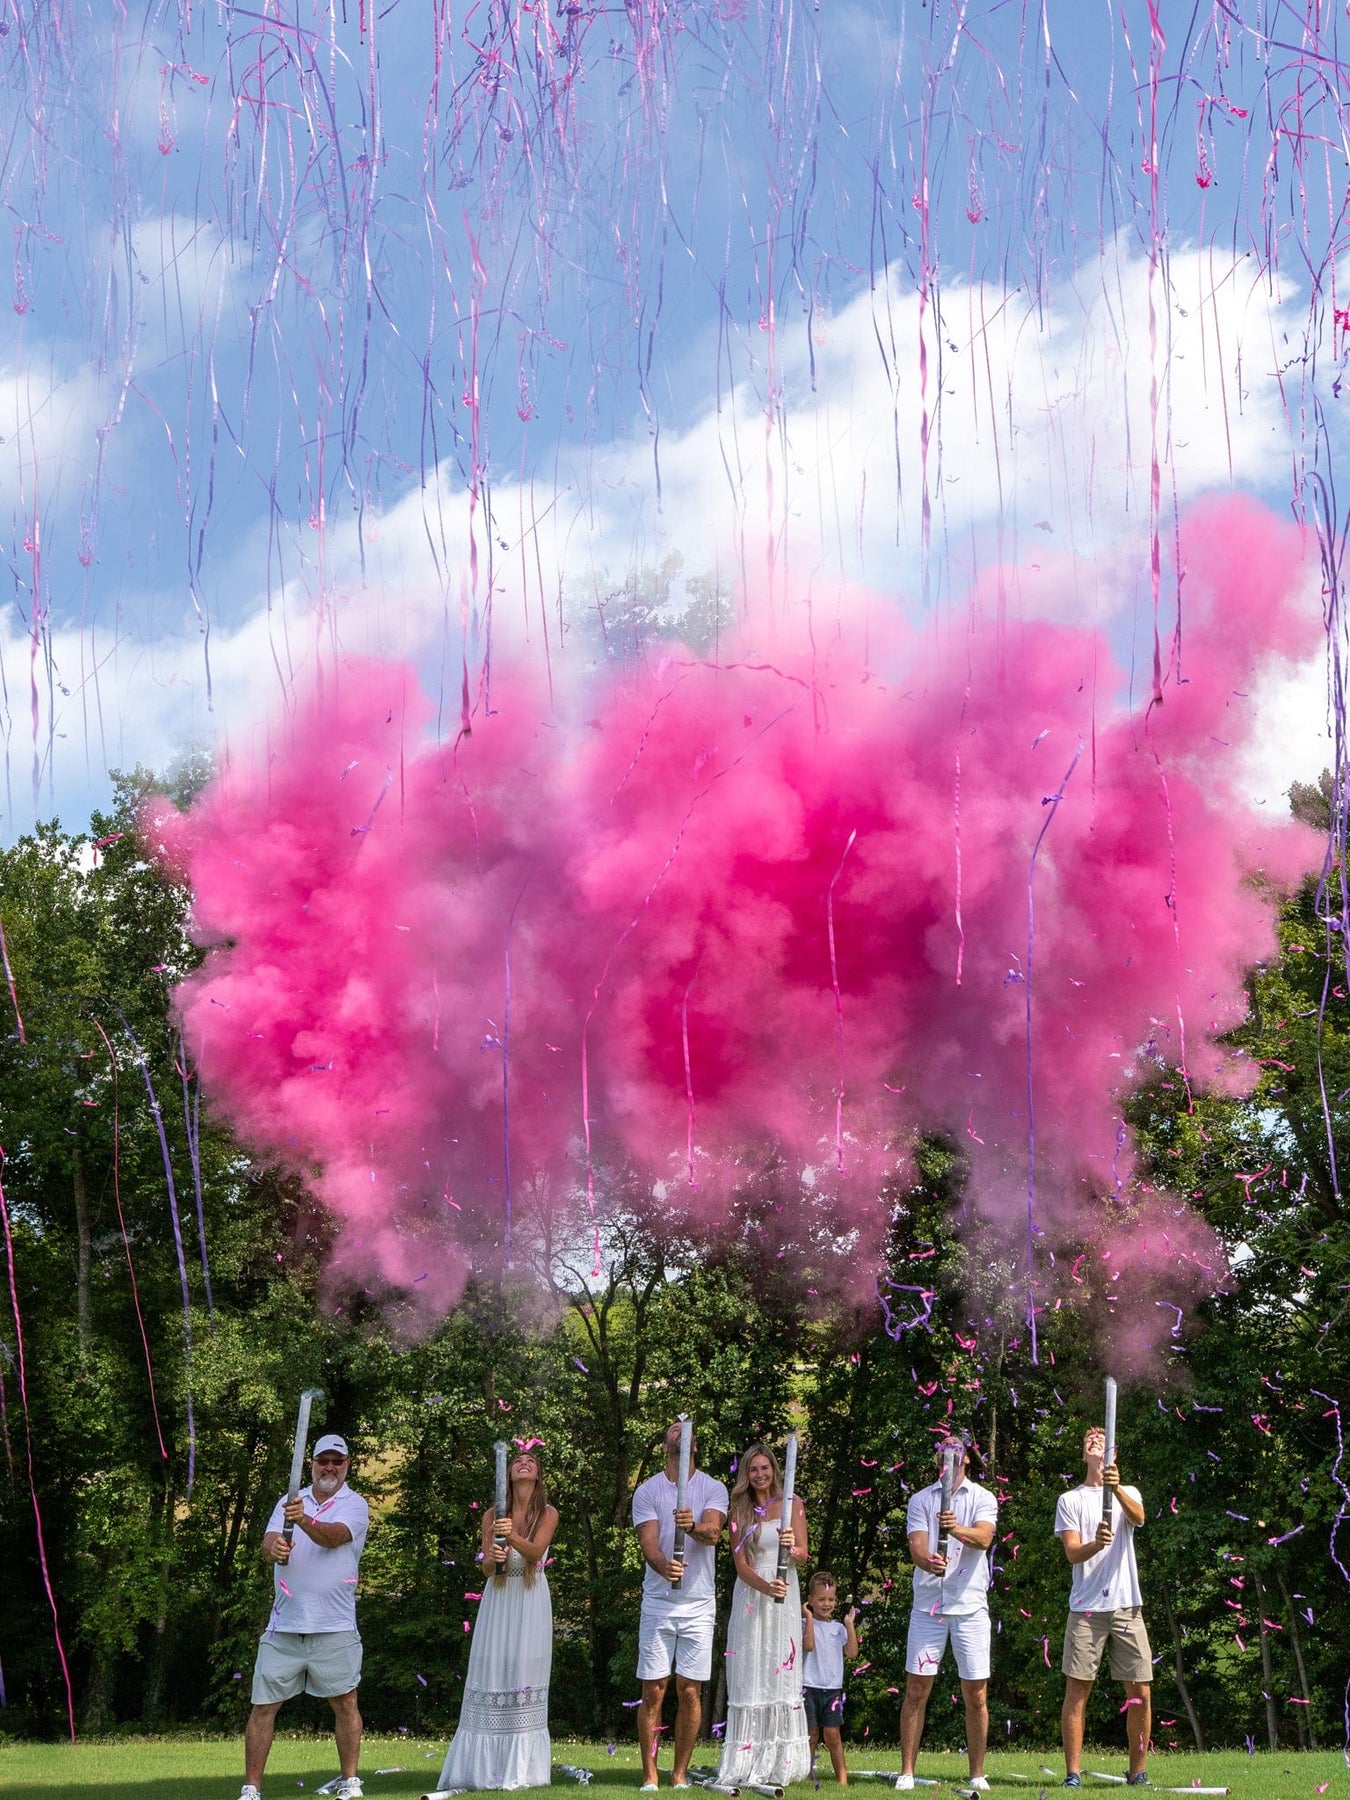 Powder Gender Reveal Cannons – POOF THERE IT IS!